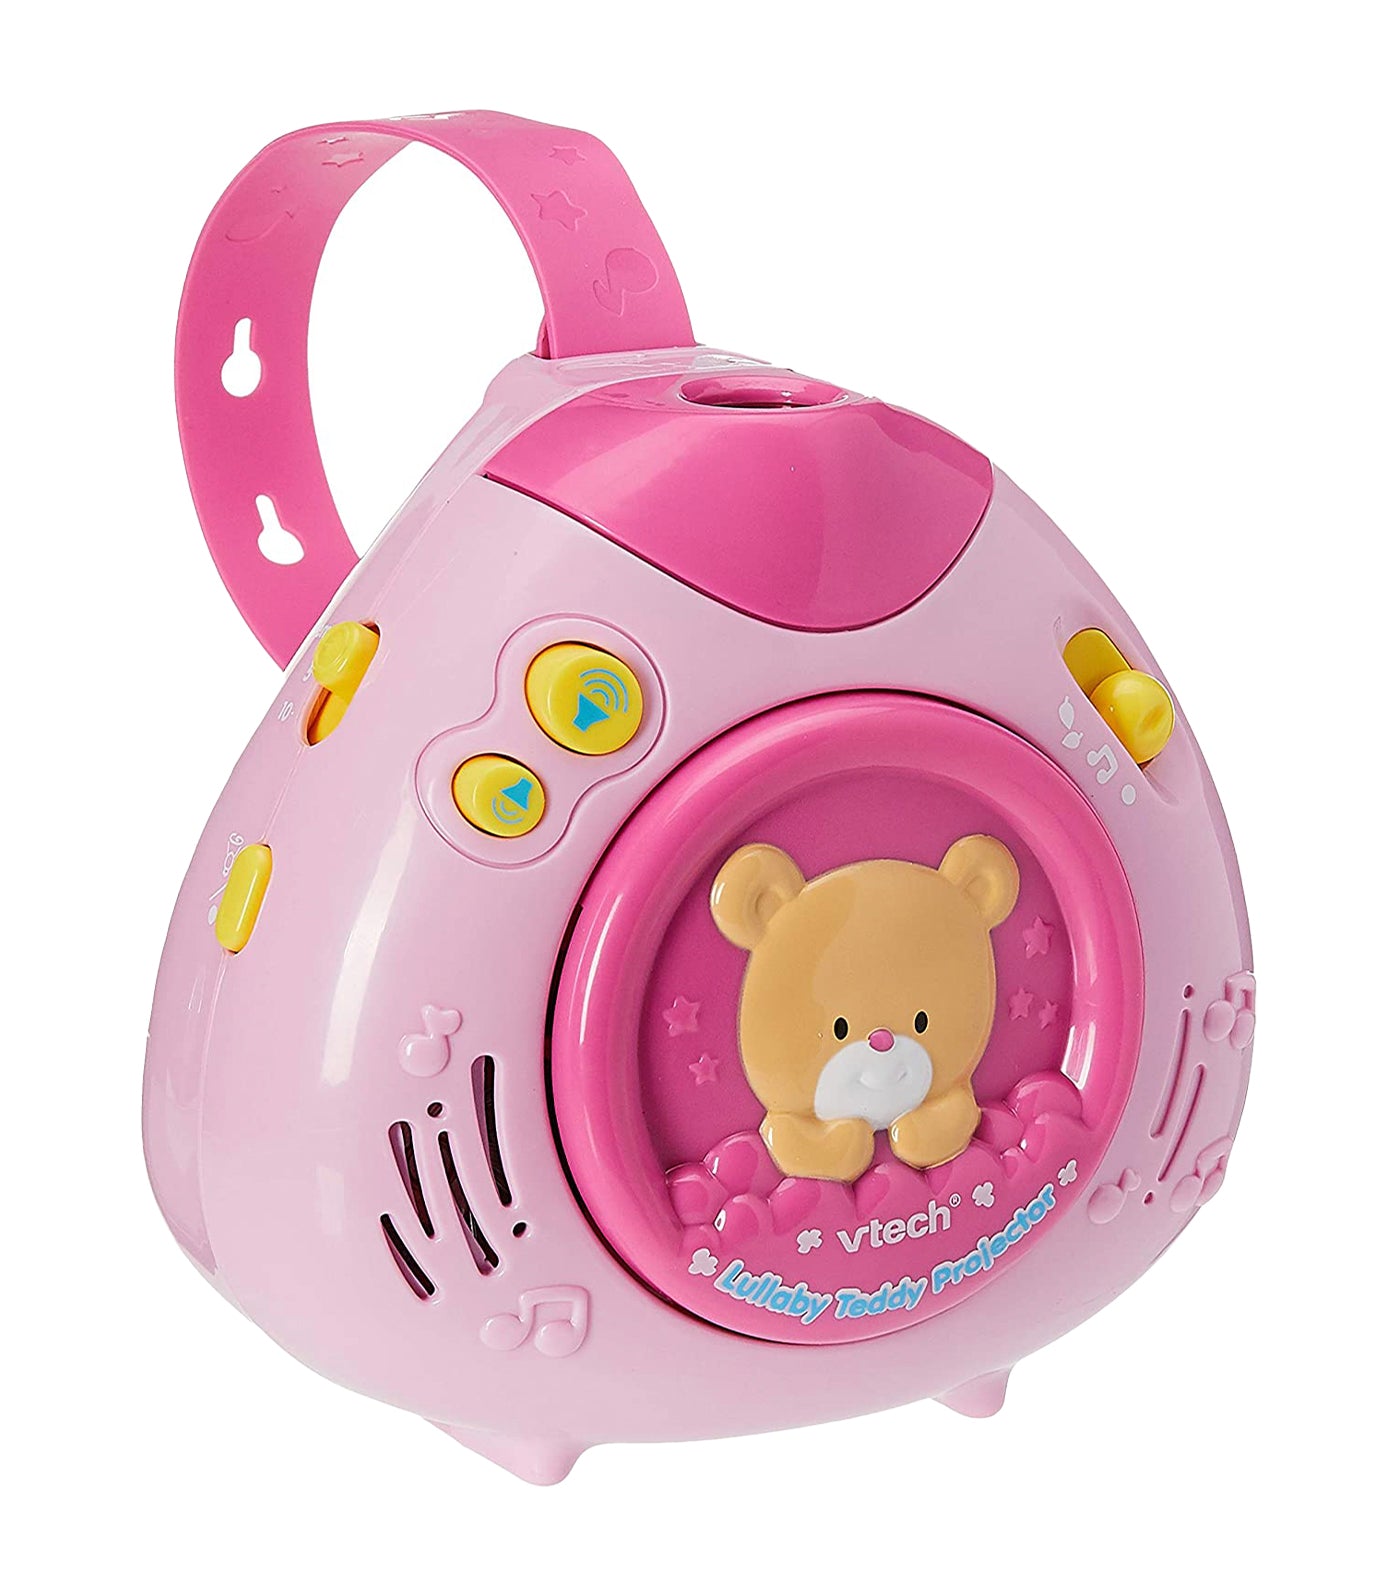 vtech pink lullaby teddy projector